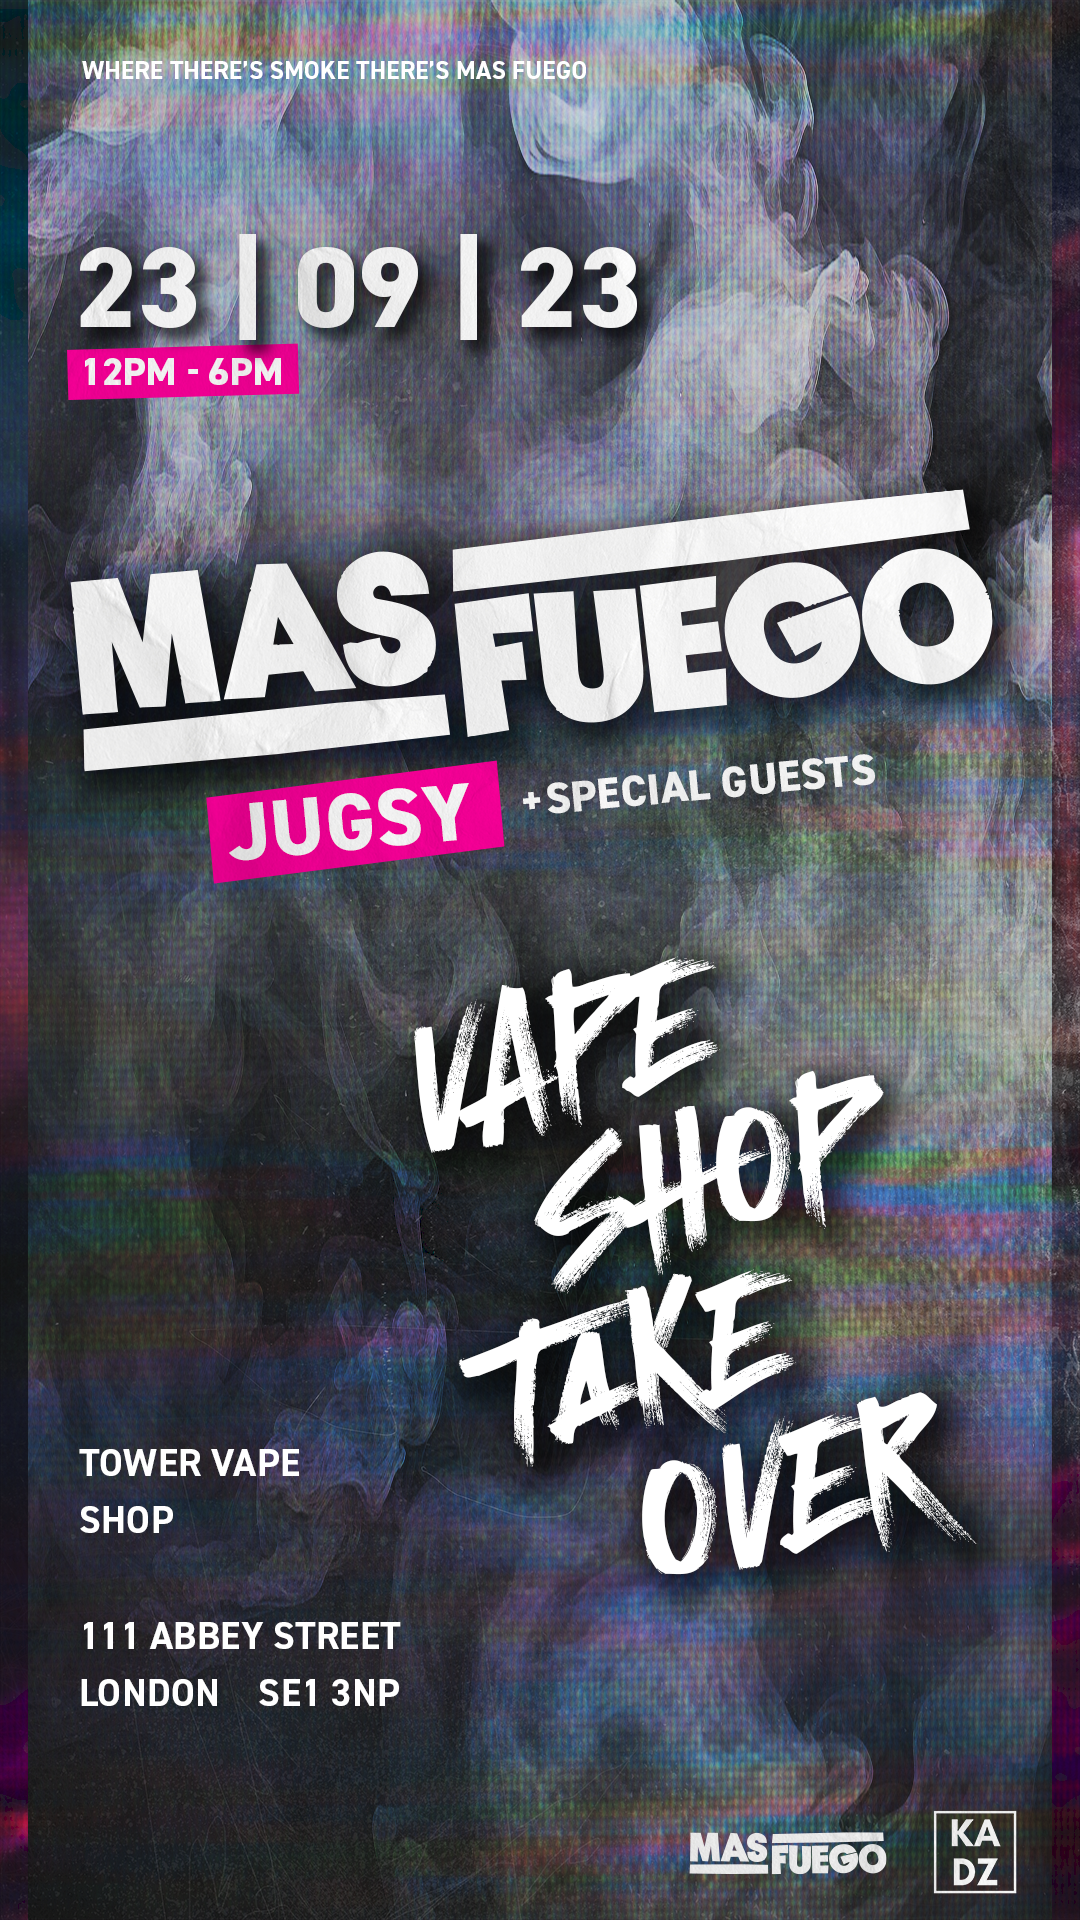 TOWER VAPE SHOP TAKEOVER with Mas Fuego & Special Guests - Página frontal